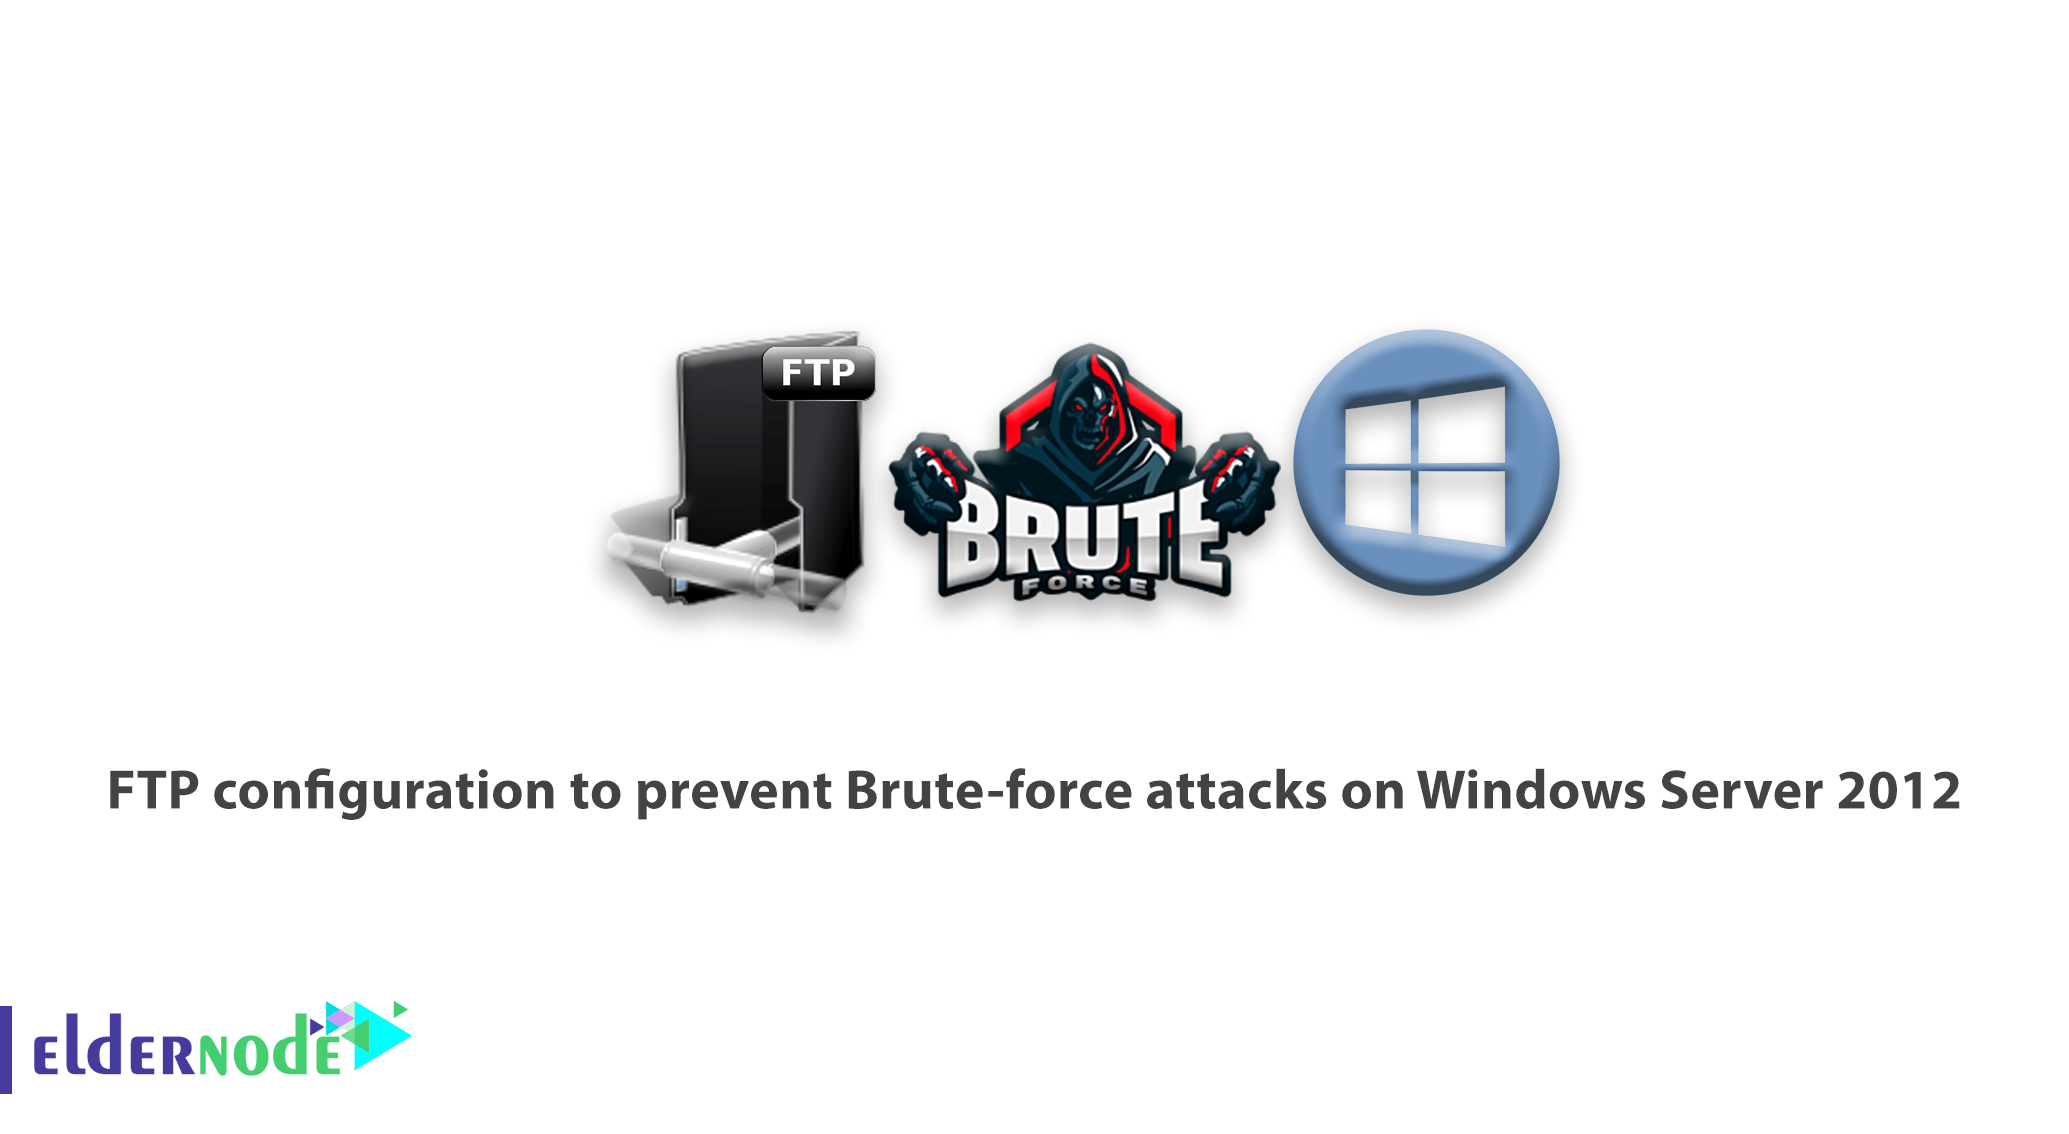 FTP configuration to prevent Brute-force attacks on Windows Server 2012